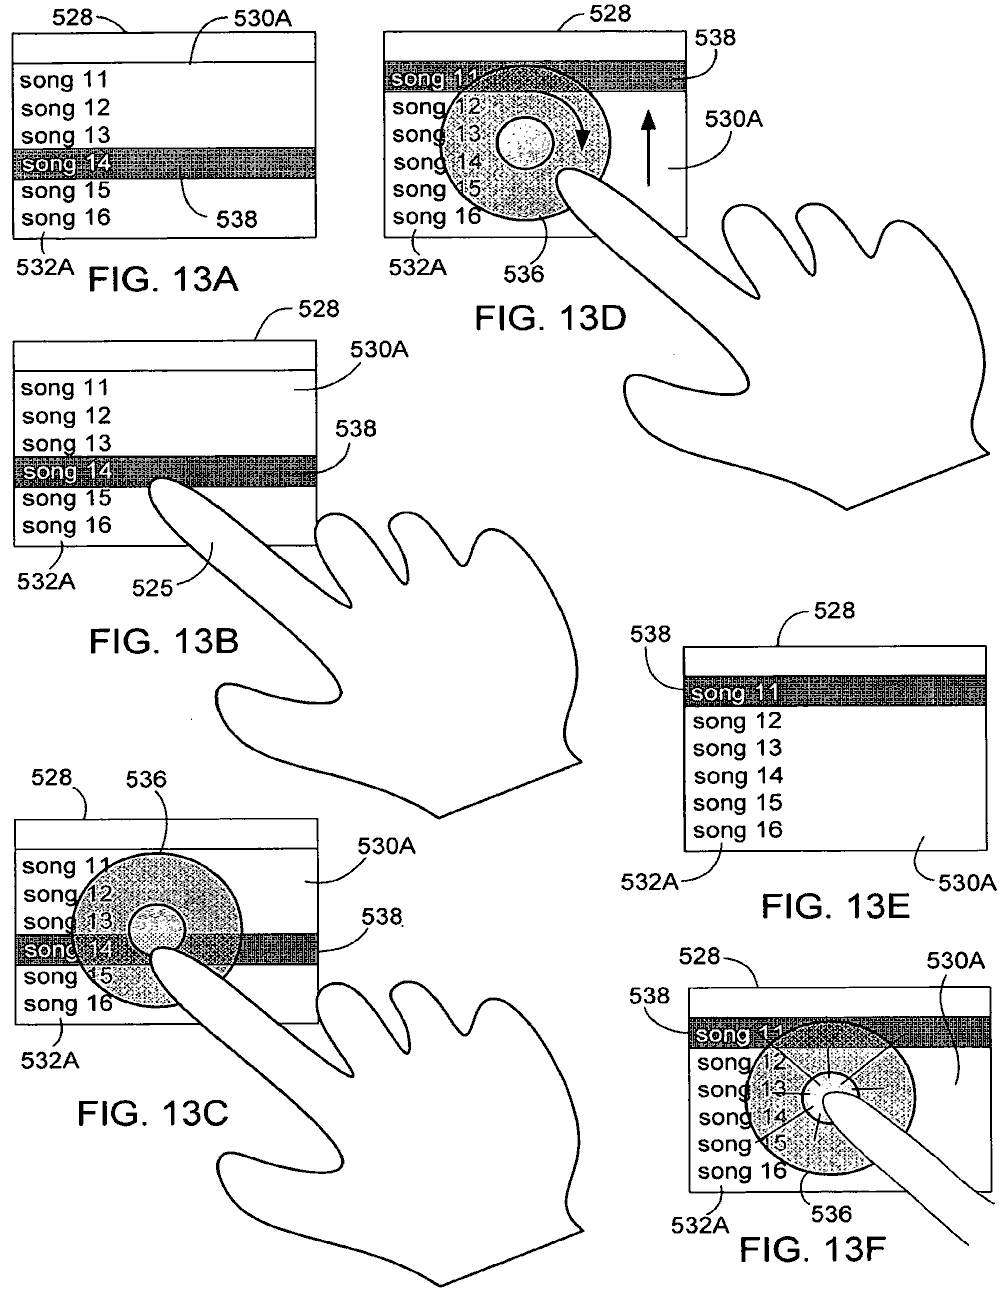 Apple Files Touch Sensitive Patent Documents For Next Generation iPod (2006)